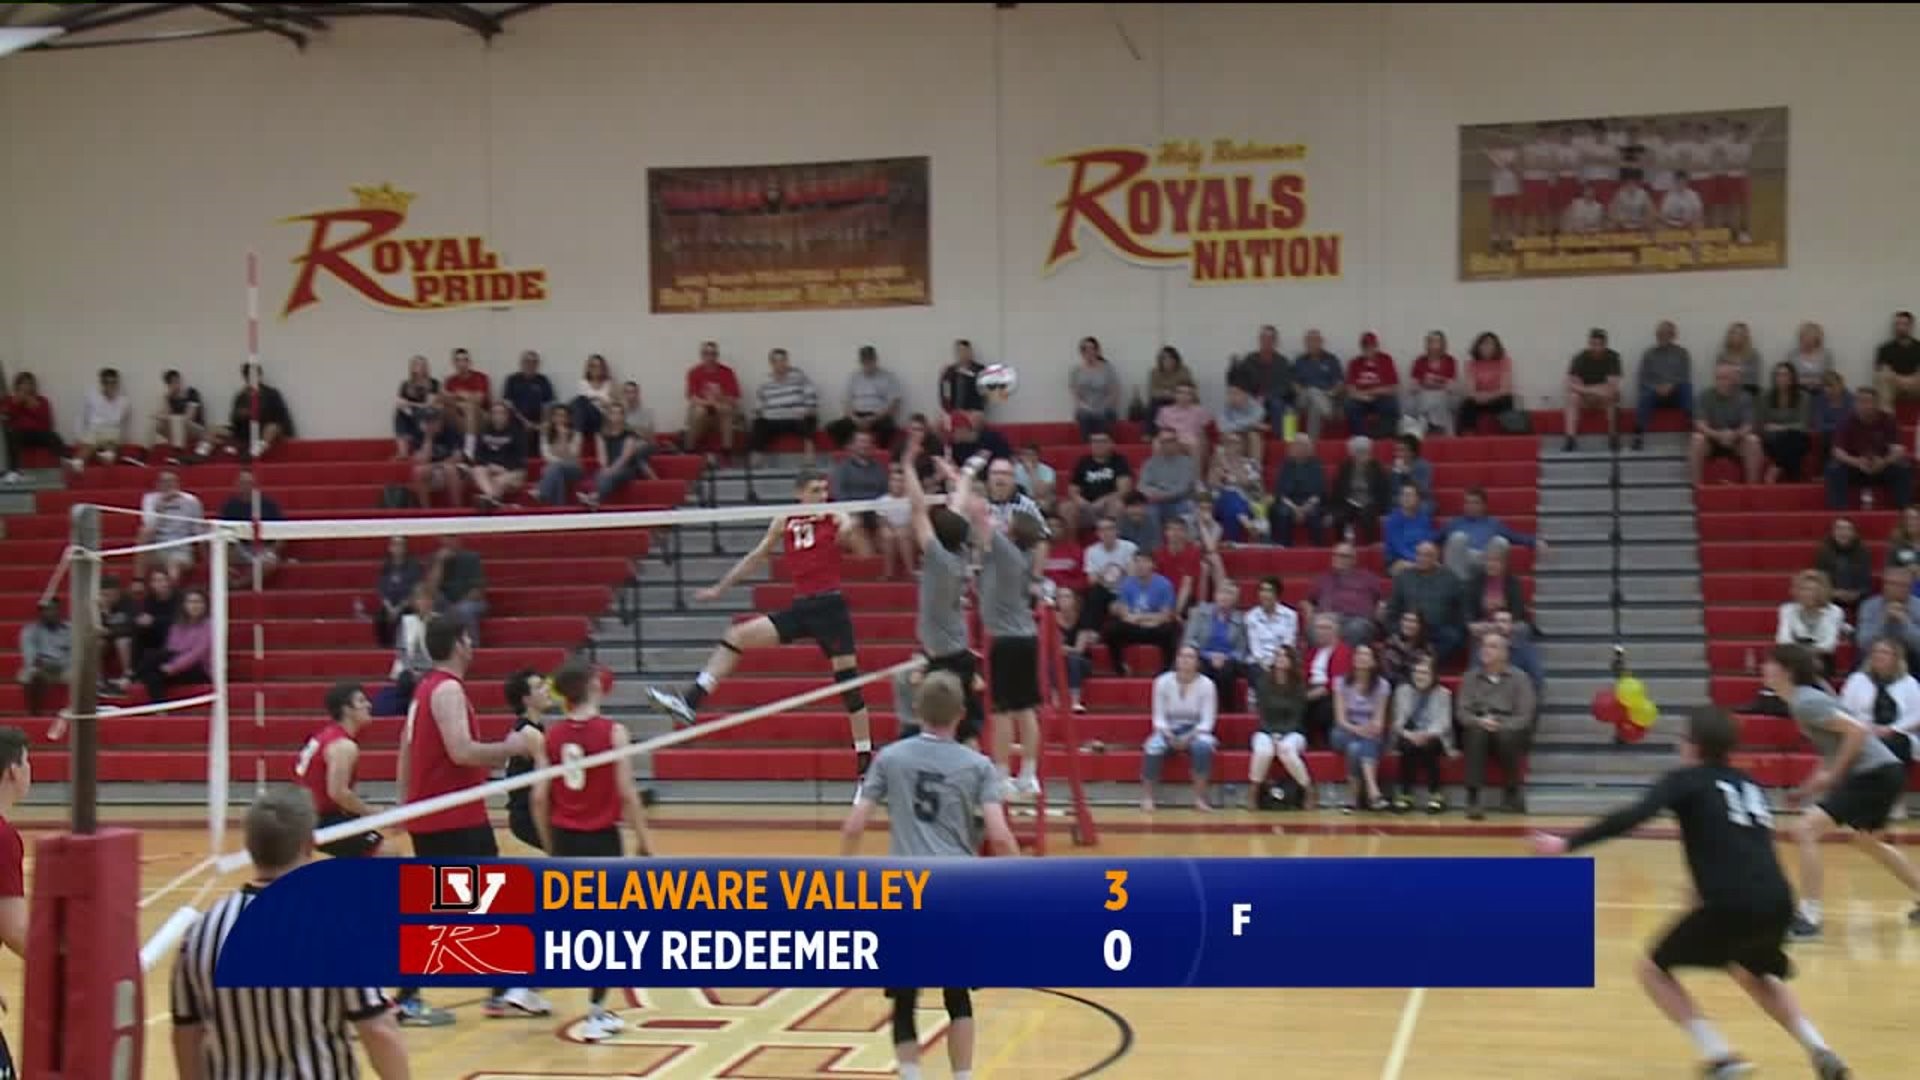 Delaware Valley vs Holy Redeemer volleyball